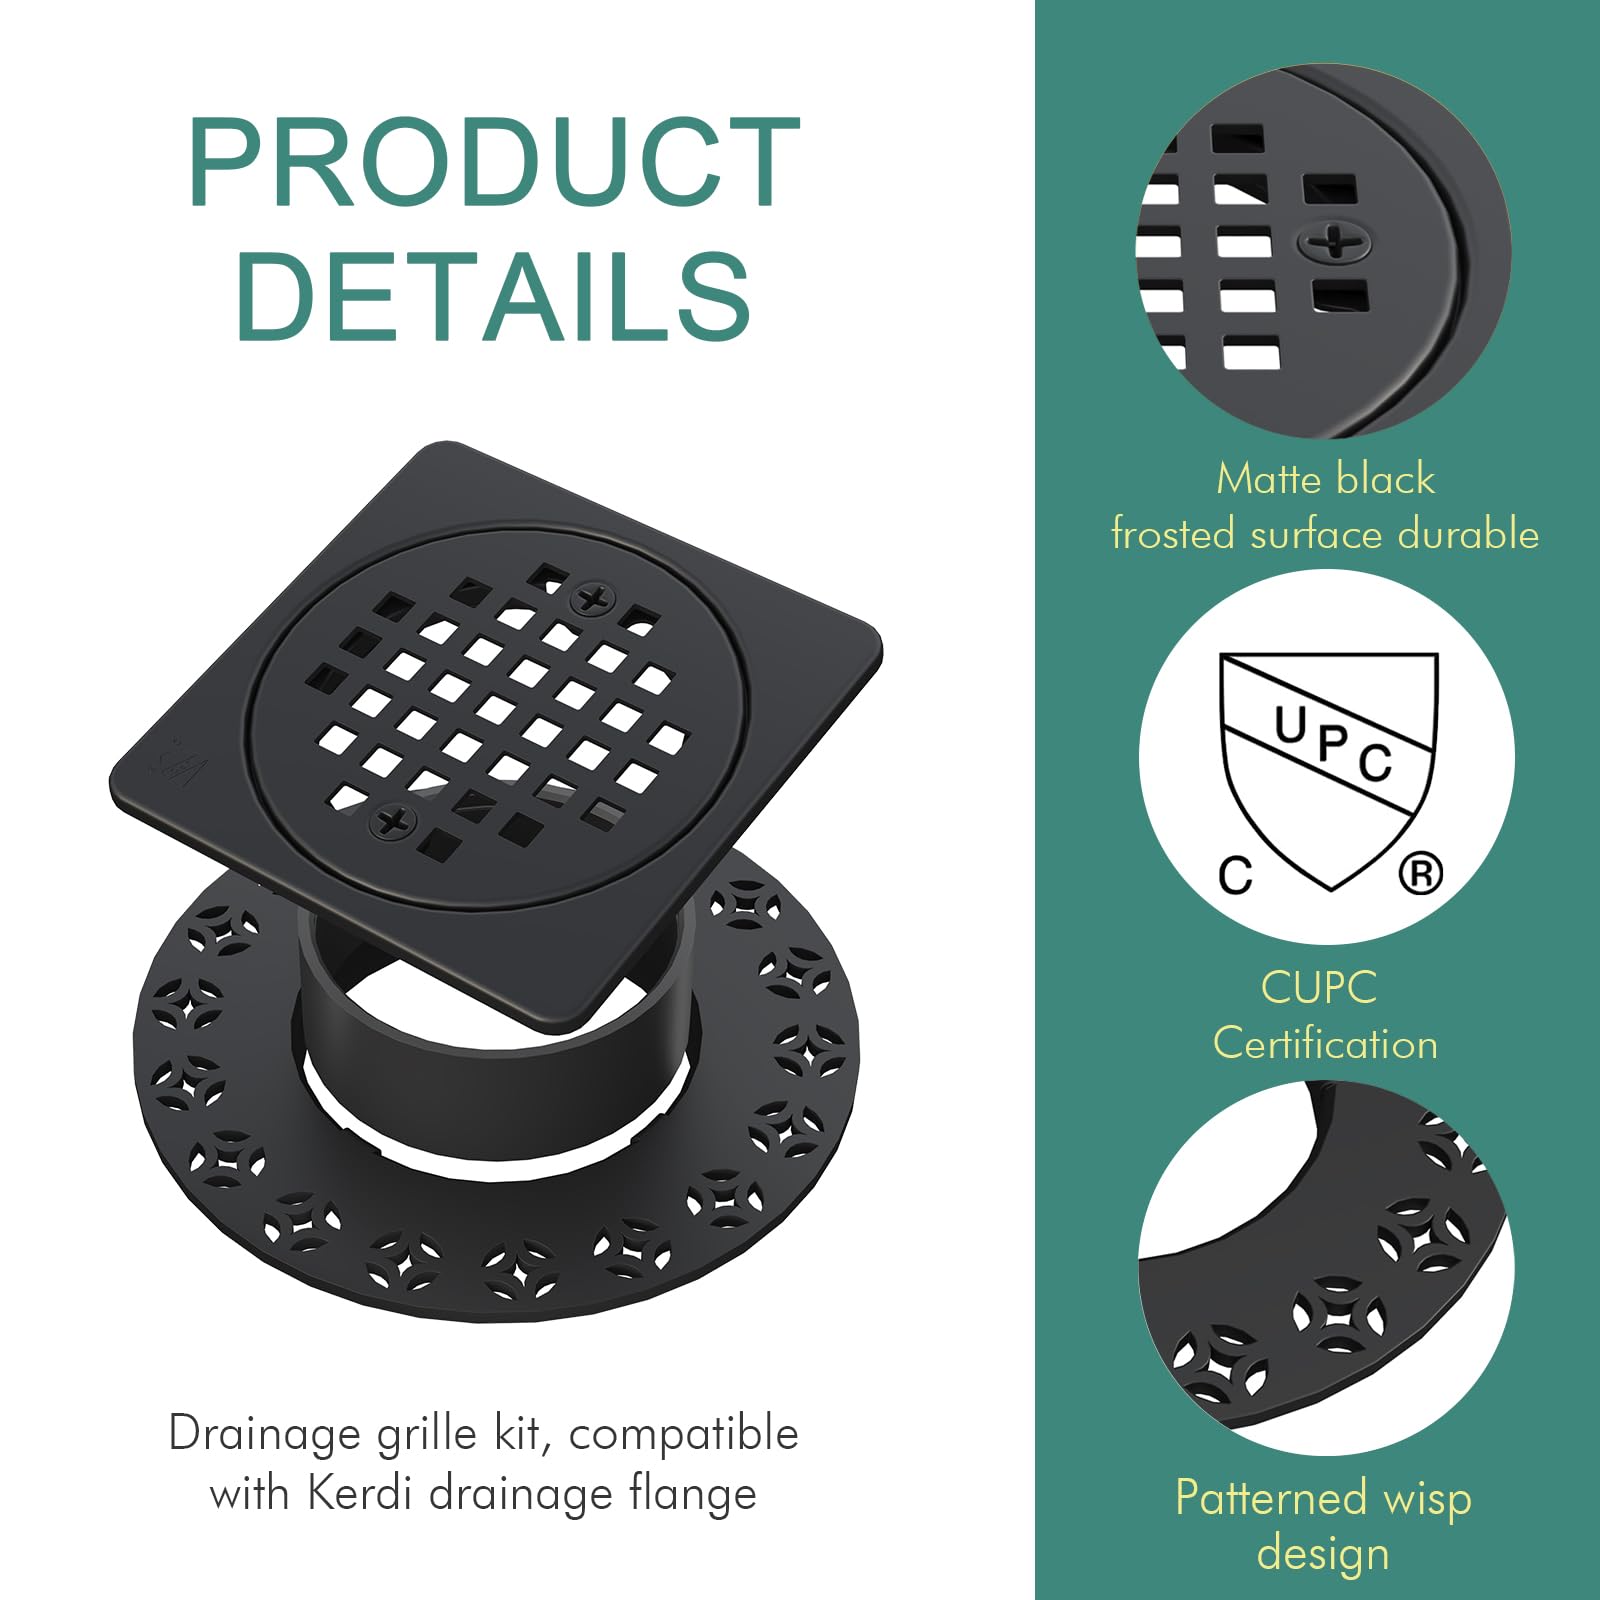 Uni-Green 4” Drain Grate Kit Replacement Compatible with Schluter Kerdi-Drain Flange - CUPC Certification, SS304 Stainless Steel and Durable ABS Material, Includes Height Adjustment Collar and Ring.